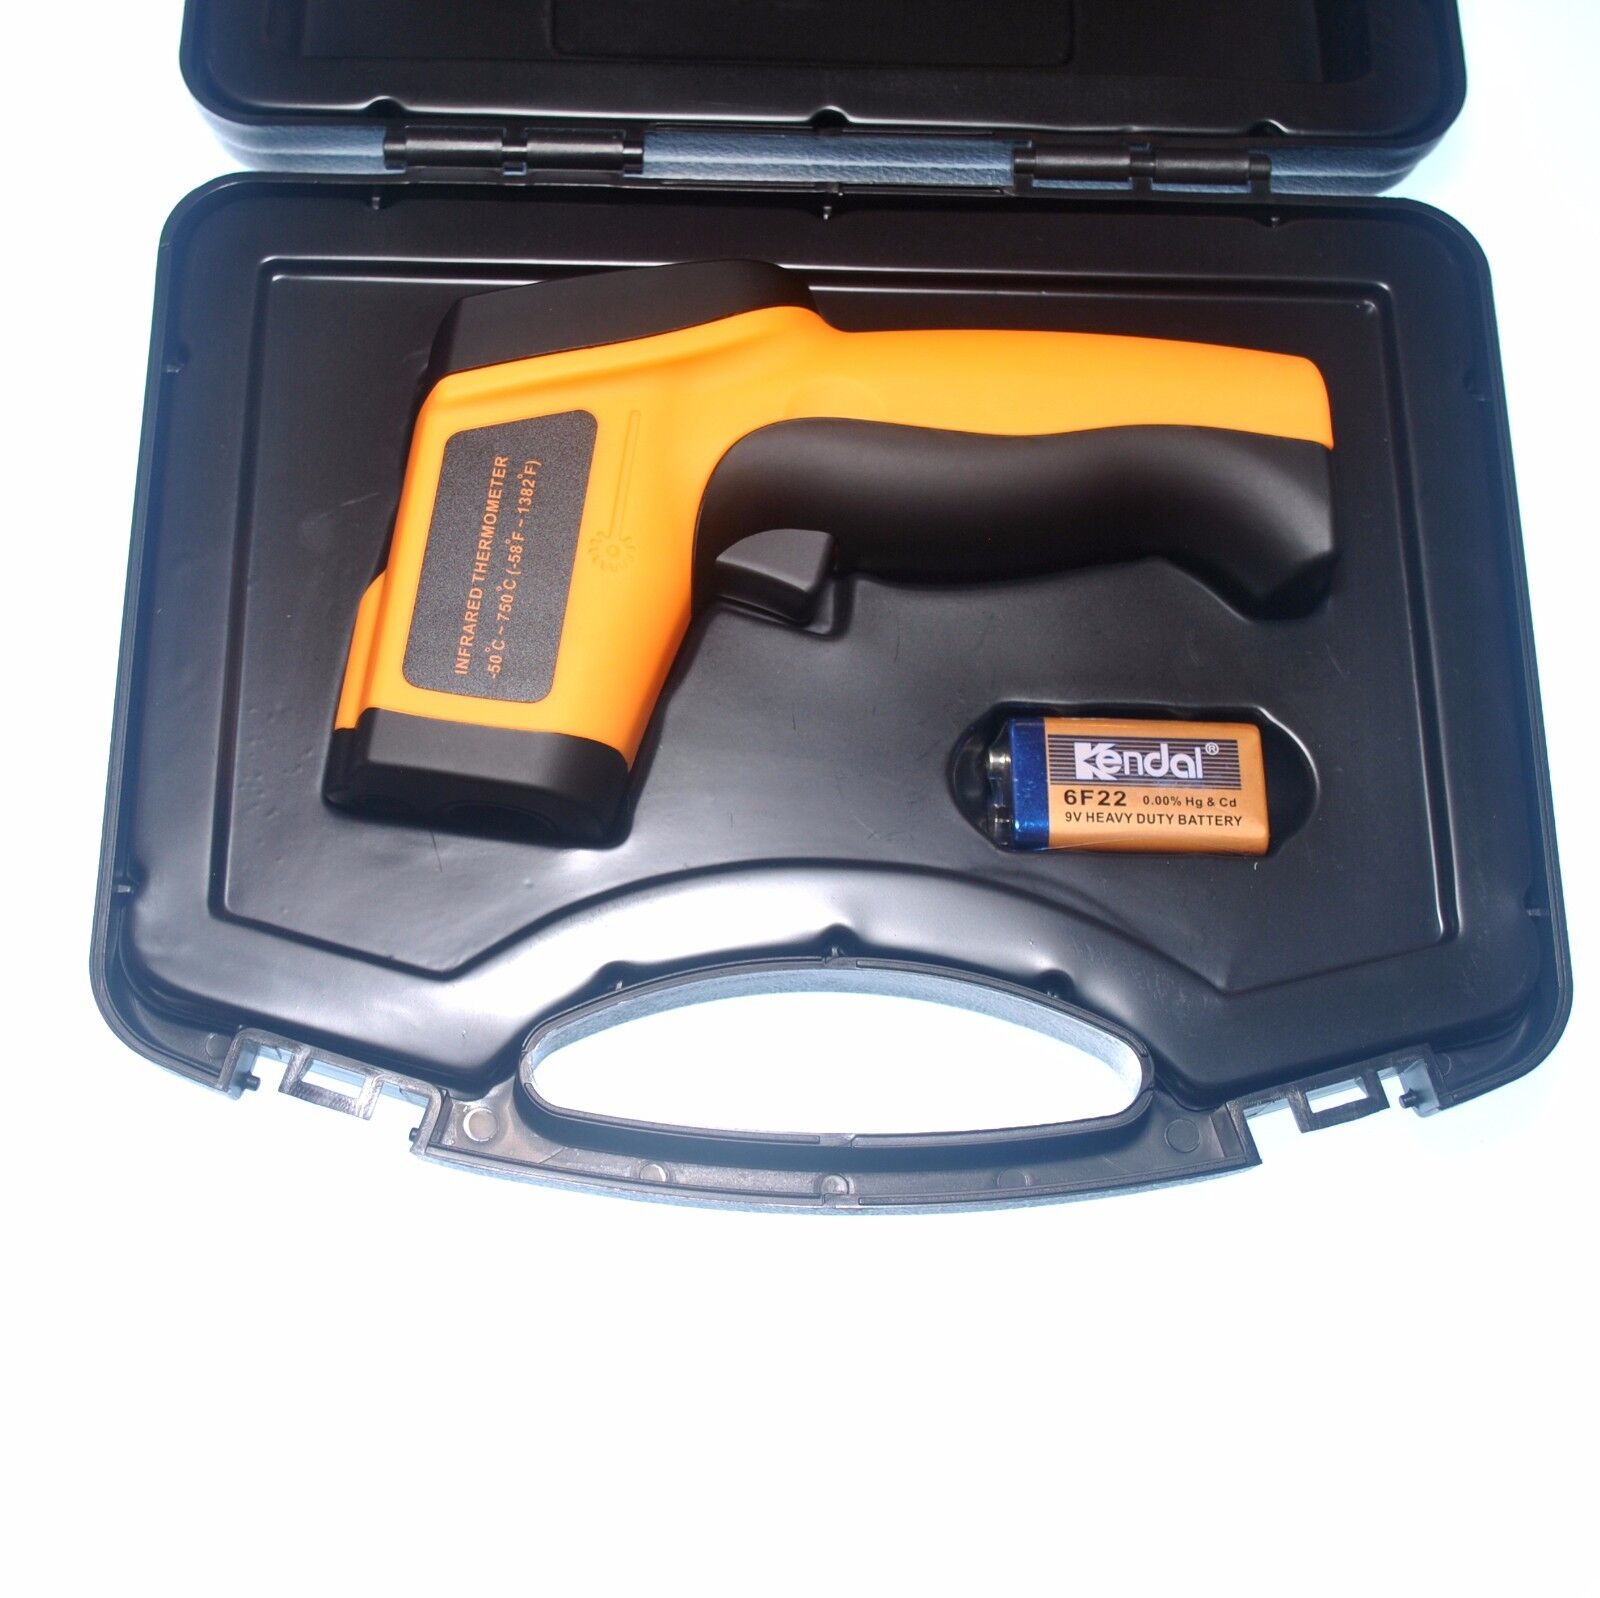 Handheld Digital Infrared Thermometer with Case & Battery